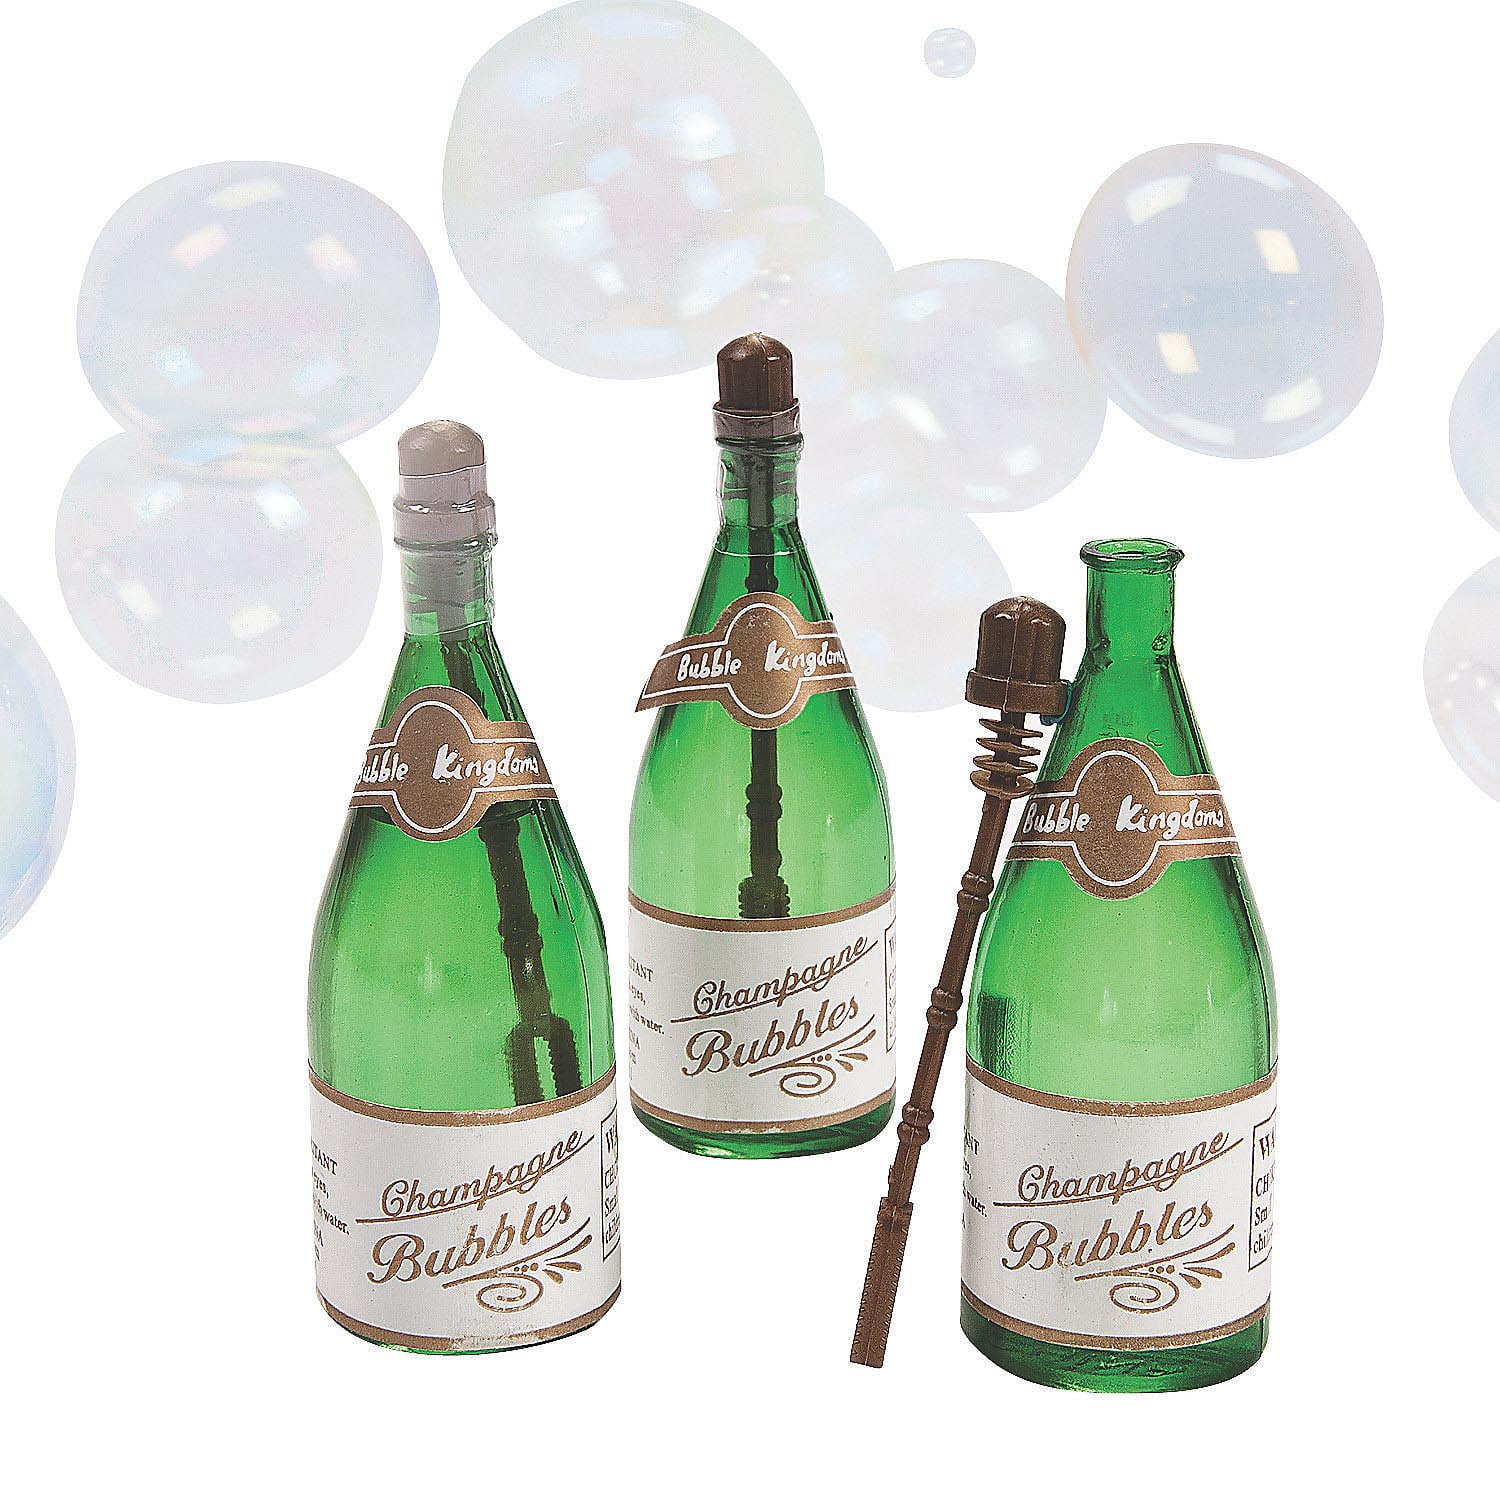 48 Green Small Champagne Wedding Bubble Favors Party Decorations Supplies SALE 